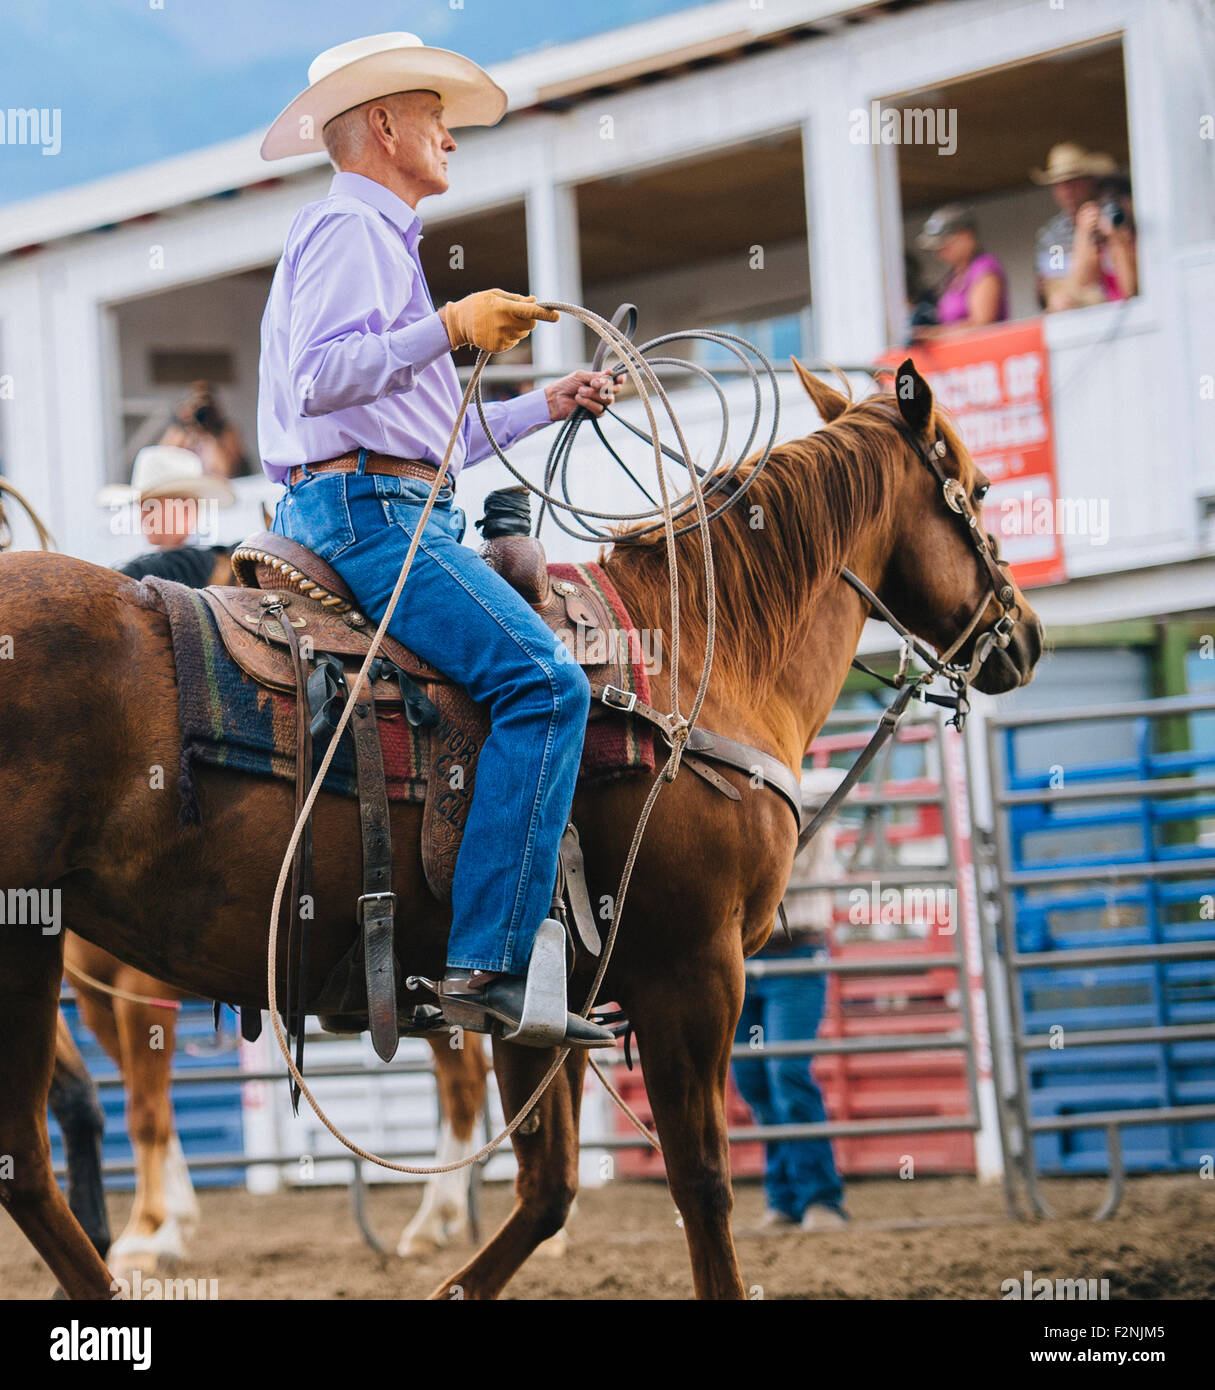 Caucasian cowboy riding horse in rodeo Stock Photo